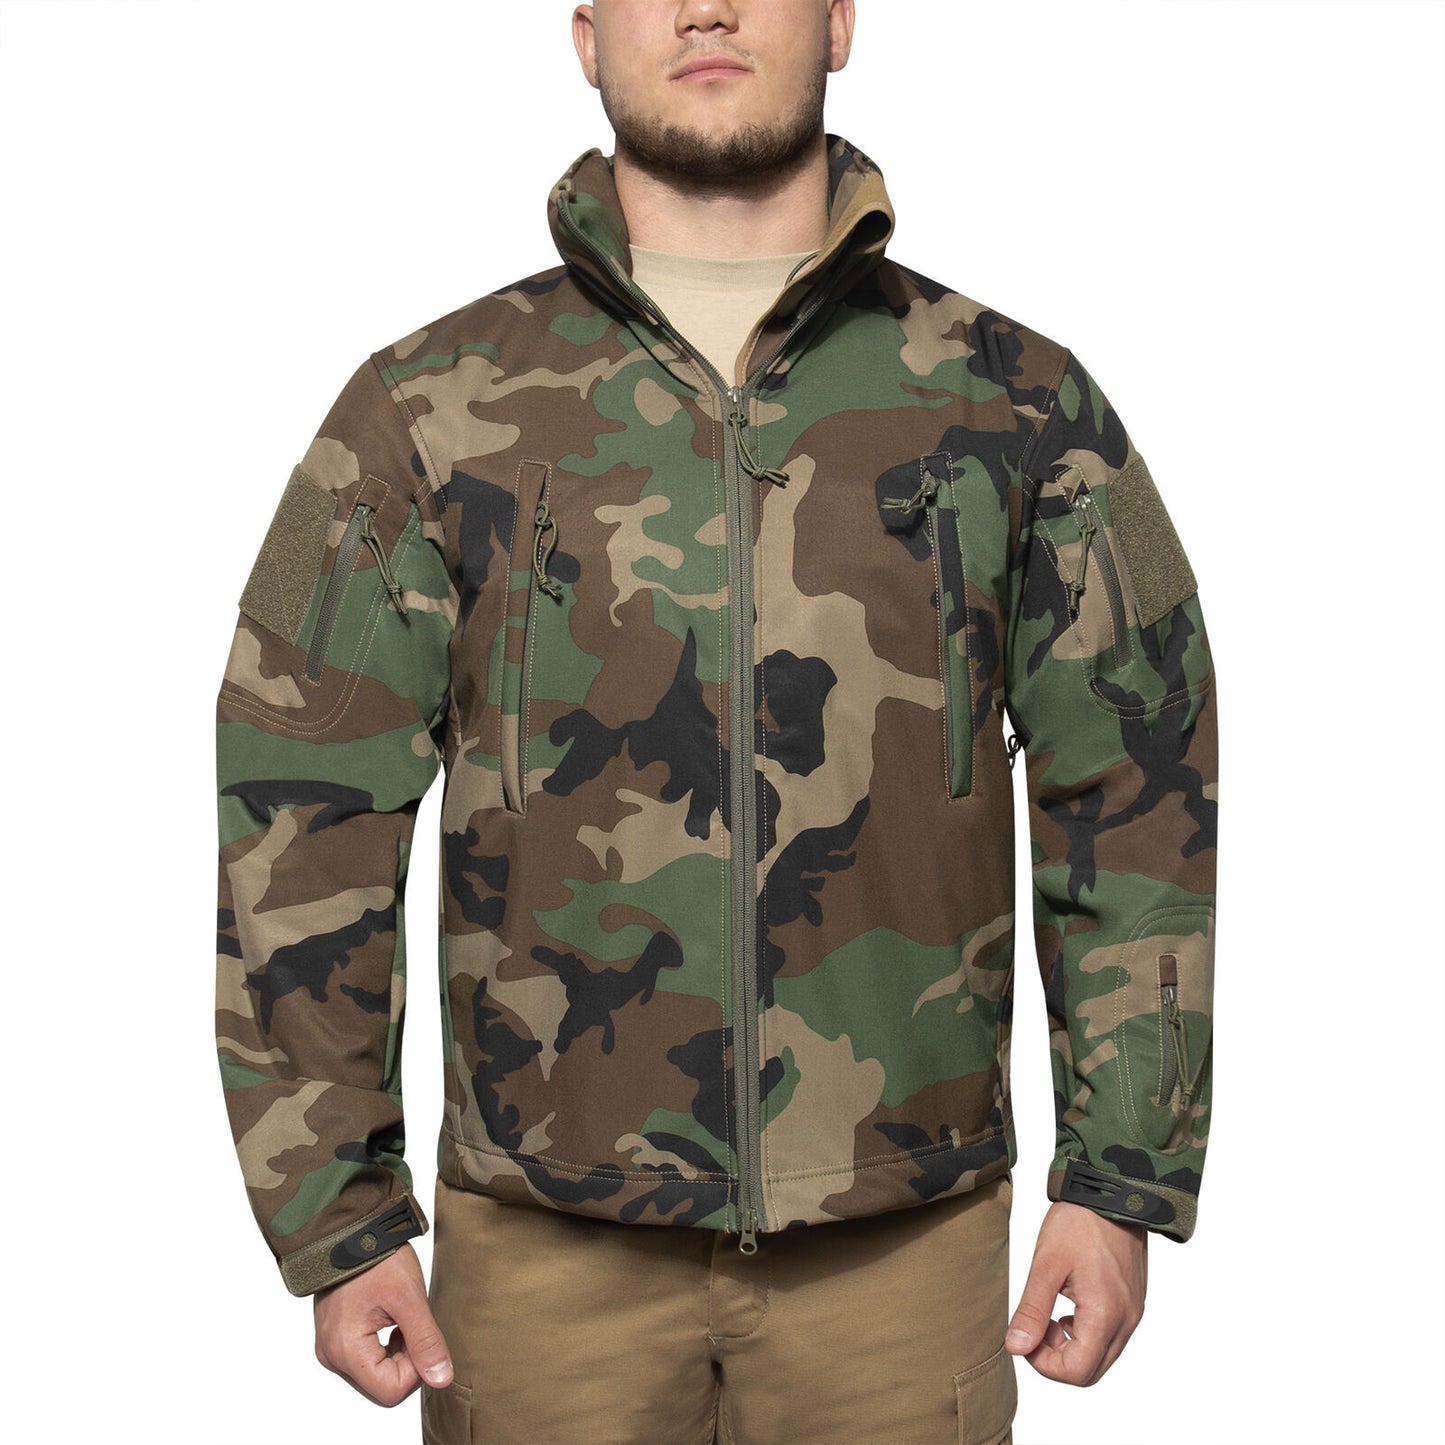 Men's Concealed Carry Water Resistant Soft Shell Tactical Jacket - Woodland Camo